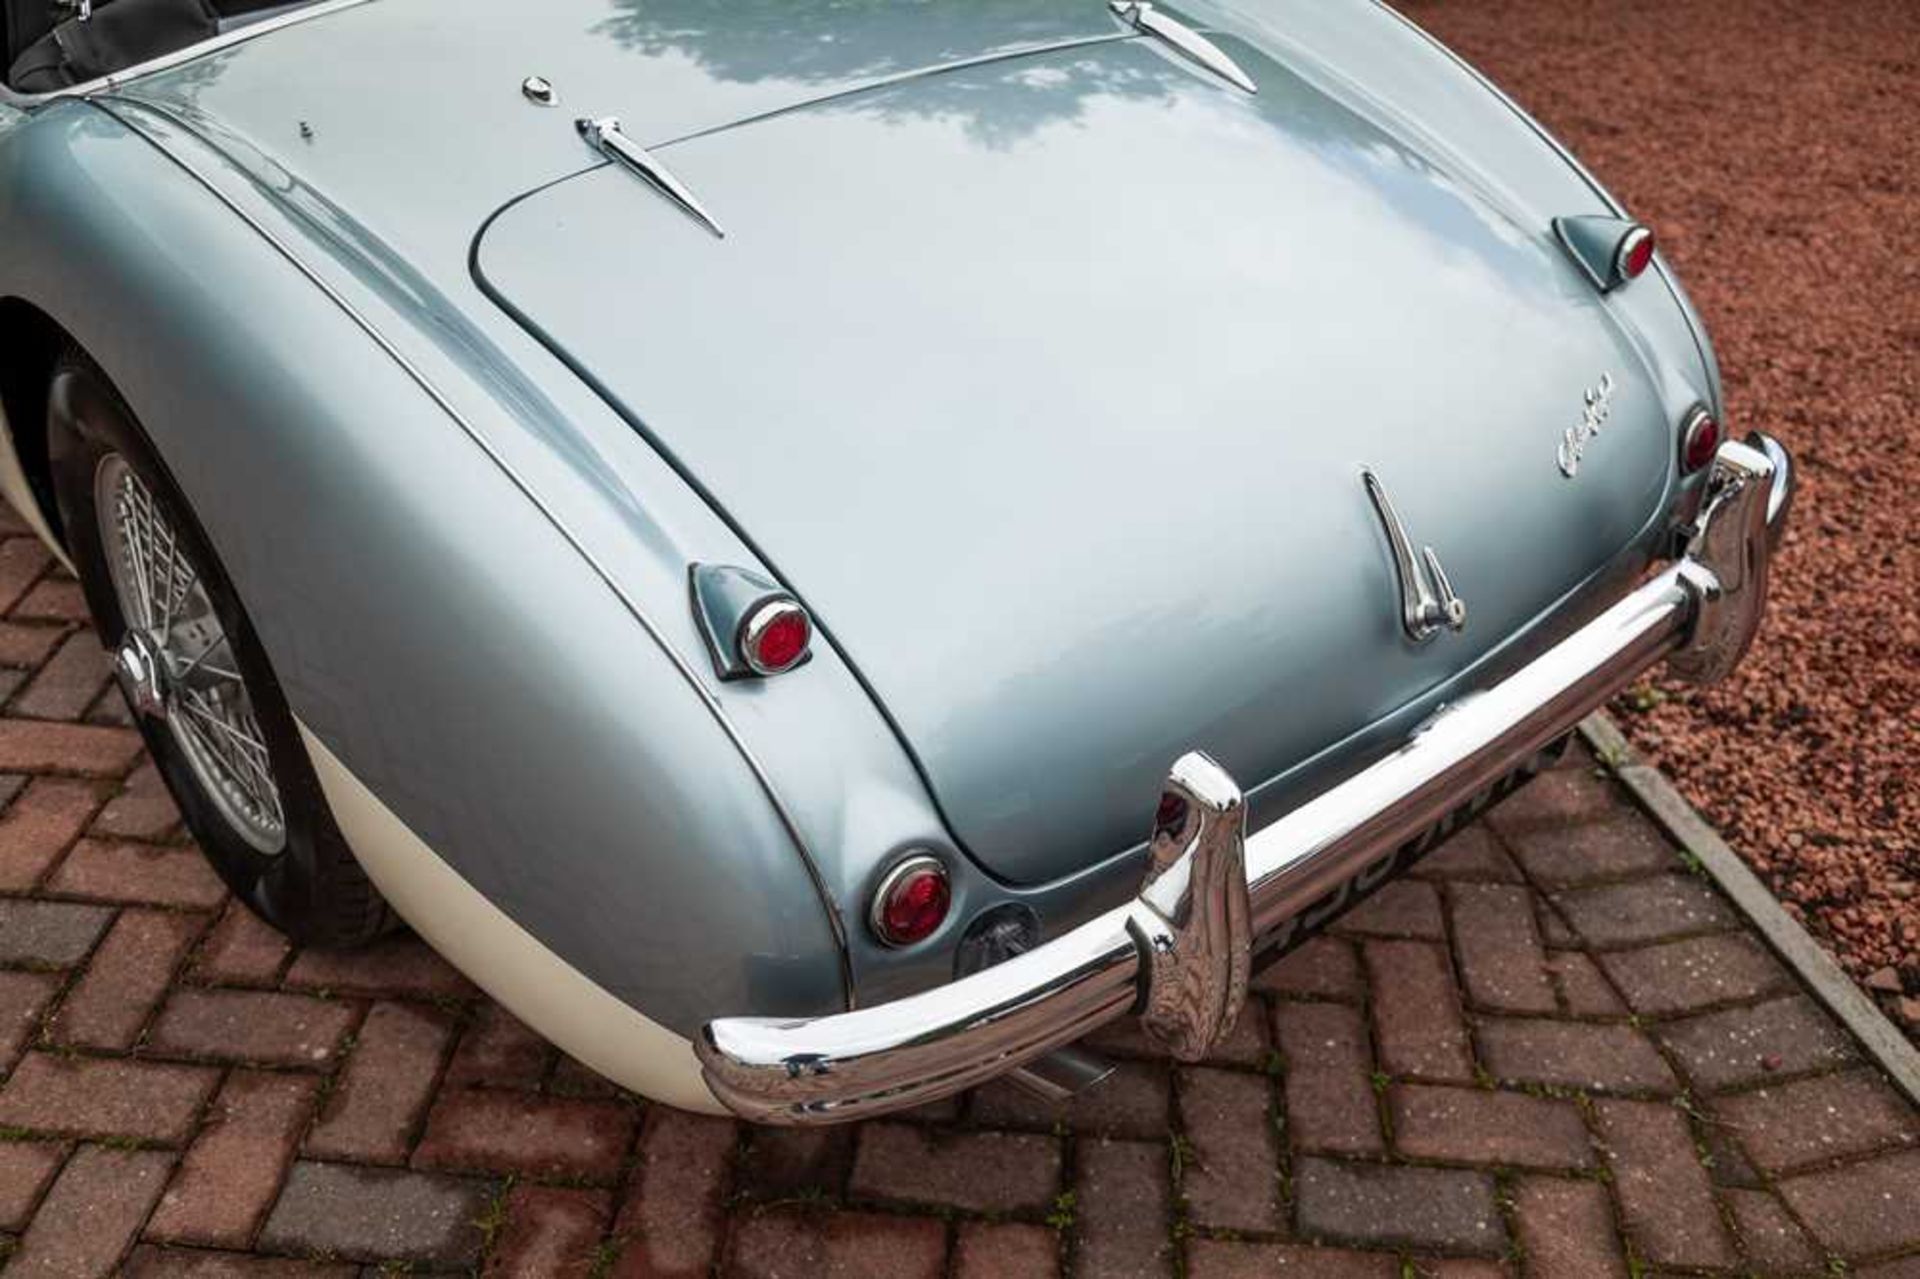 1955 Austin-Healey 100/4 Subtly Upgraded with 5-Speed Transmission and Front Disc Brakes - Image 18 of 54